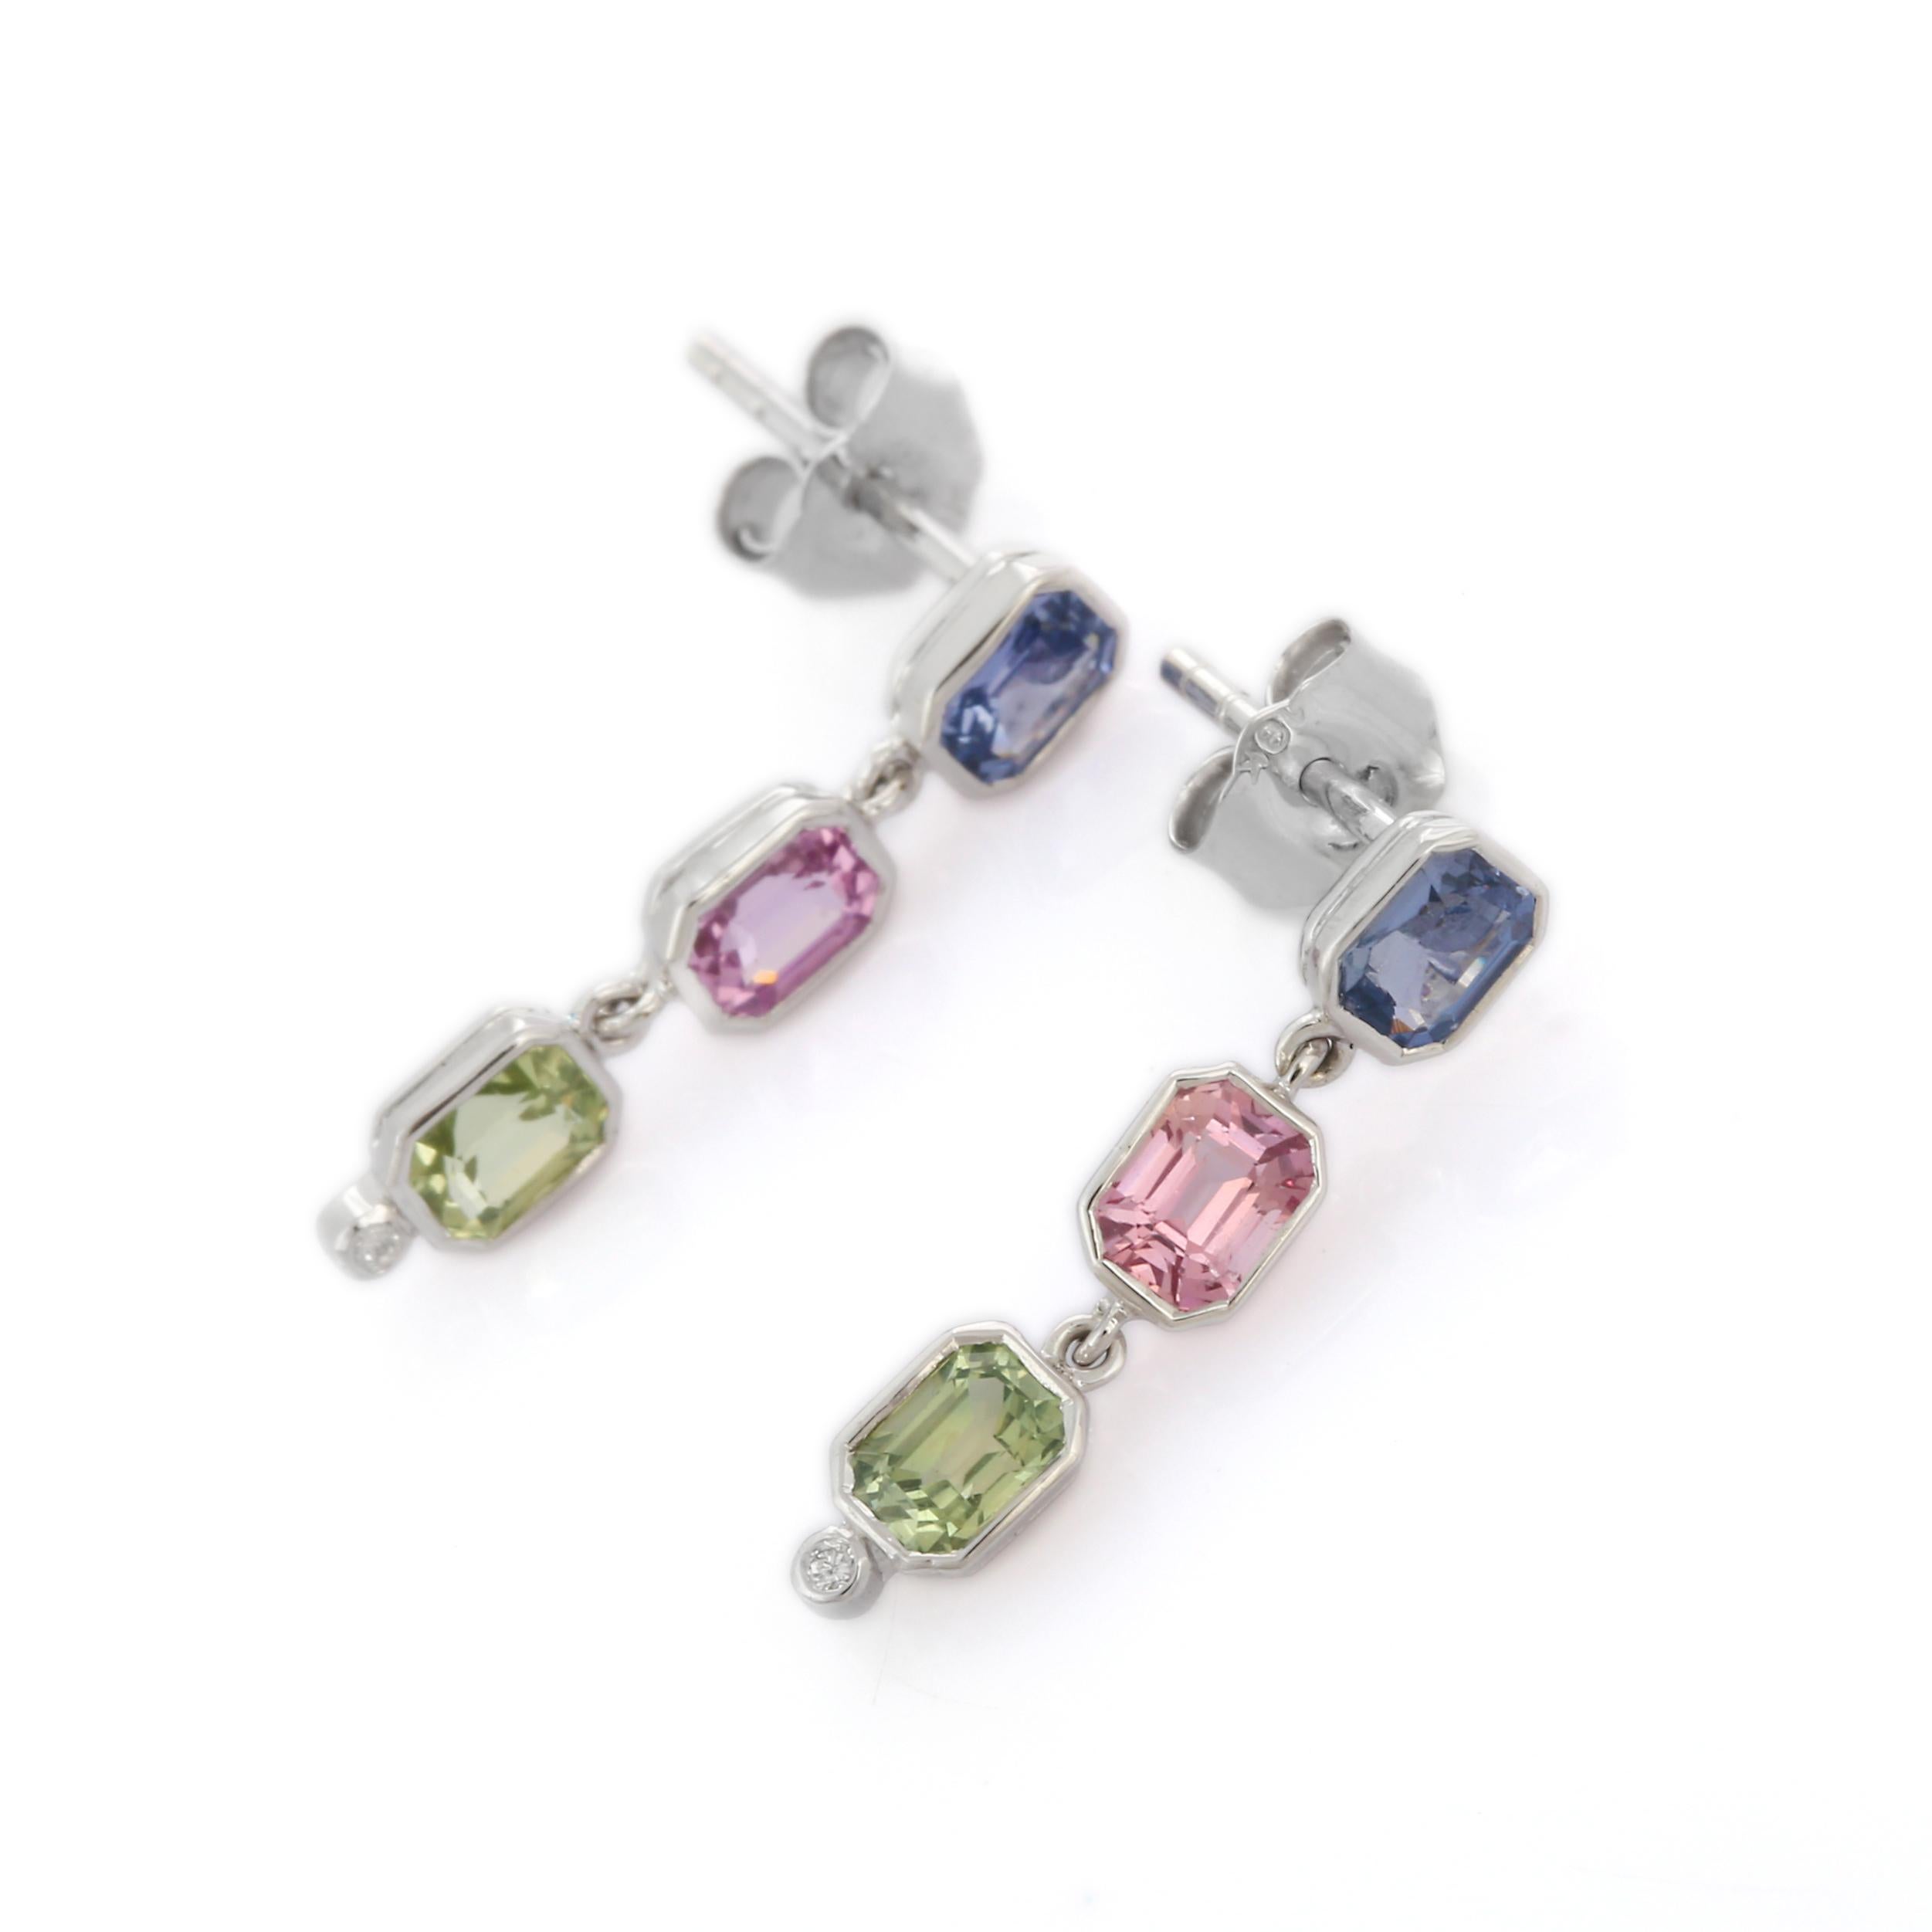 Multi sapphire dangle earrings to make a statement with your look. These earrings create a sparkling, luxurious look featuring cushion cut gemstone. These are a great bridesmaid, wedding or christmas gift for anyone on your list.
If you love to